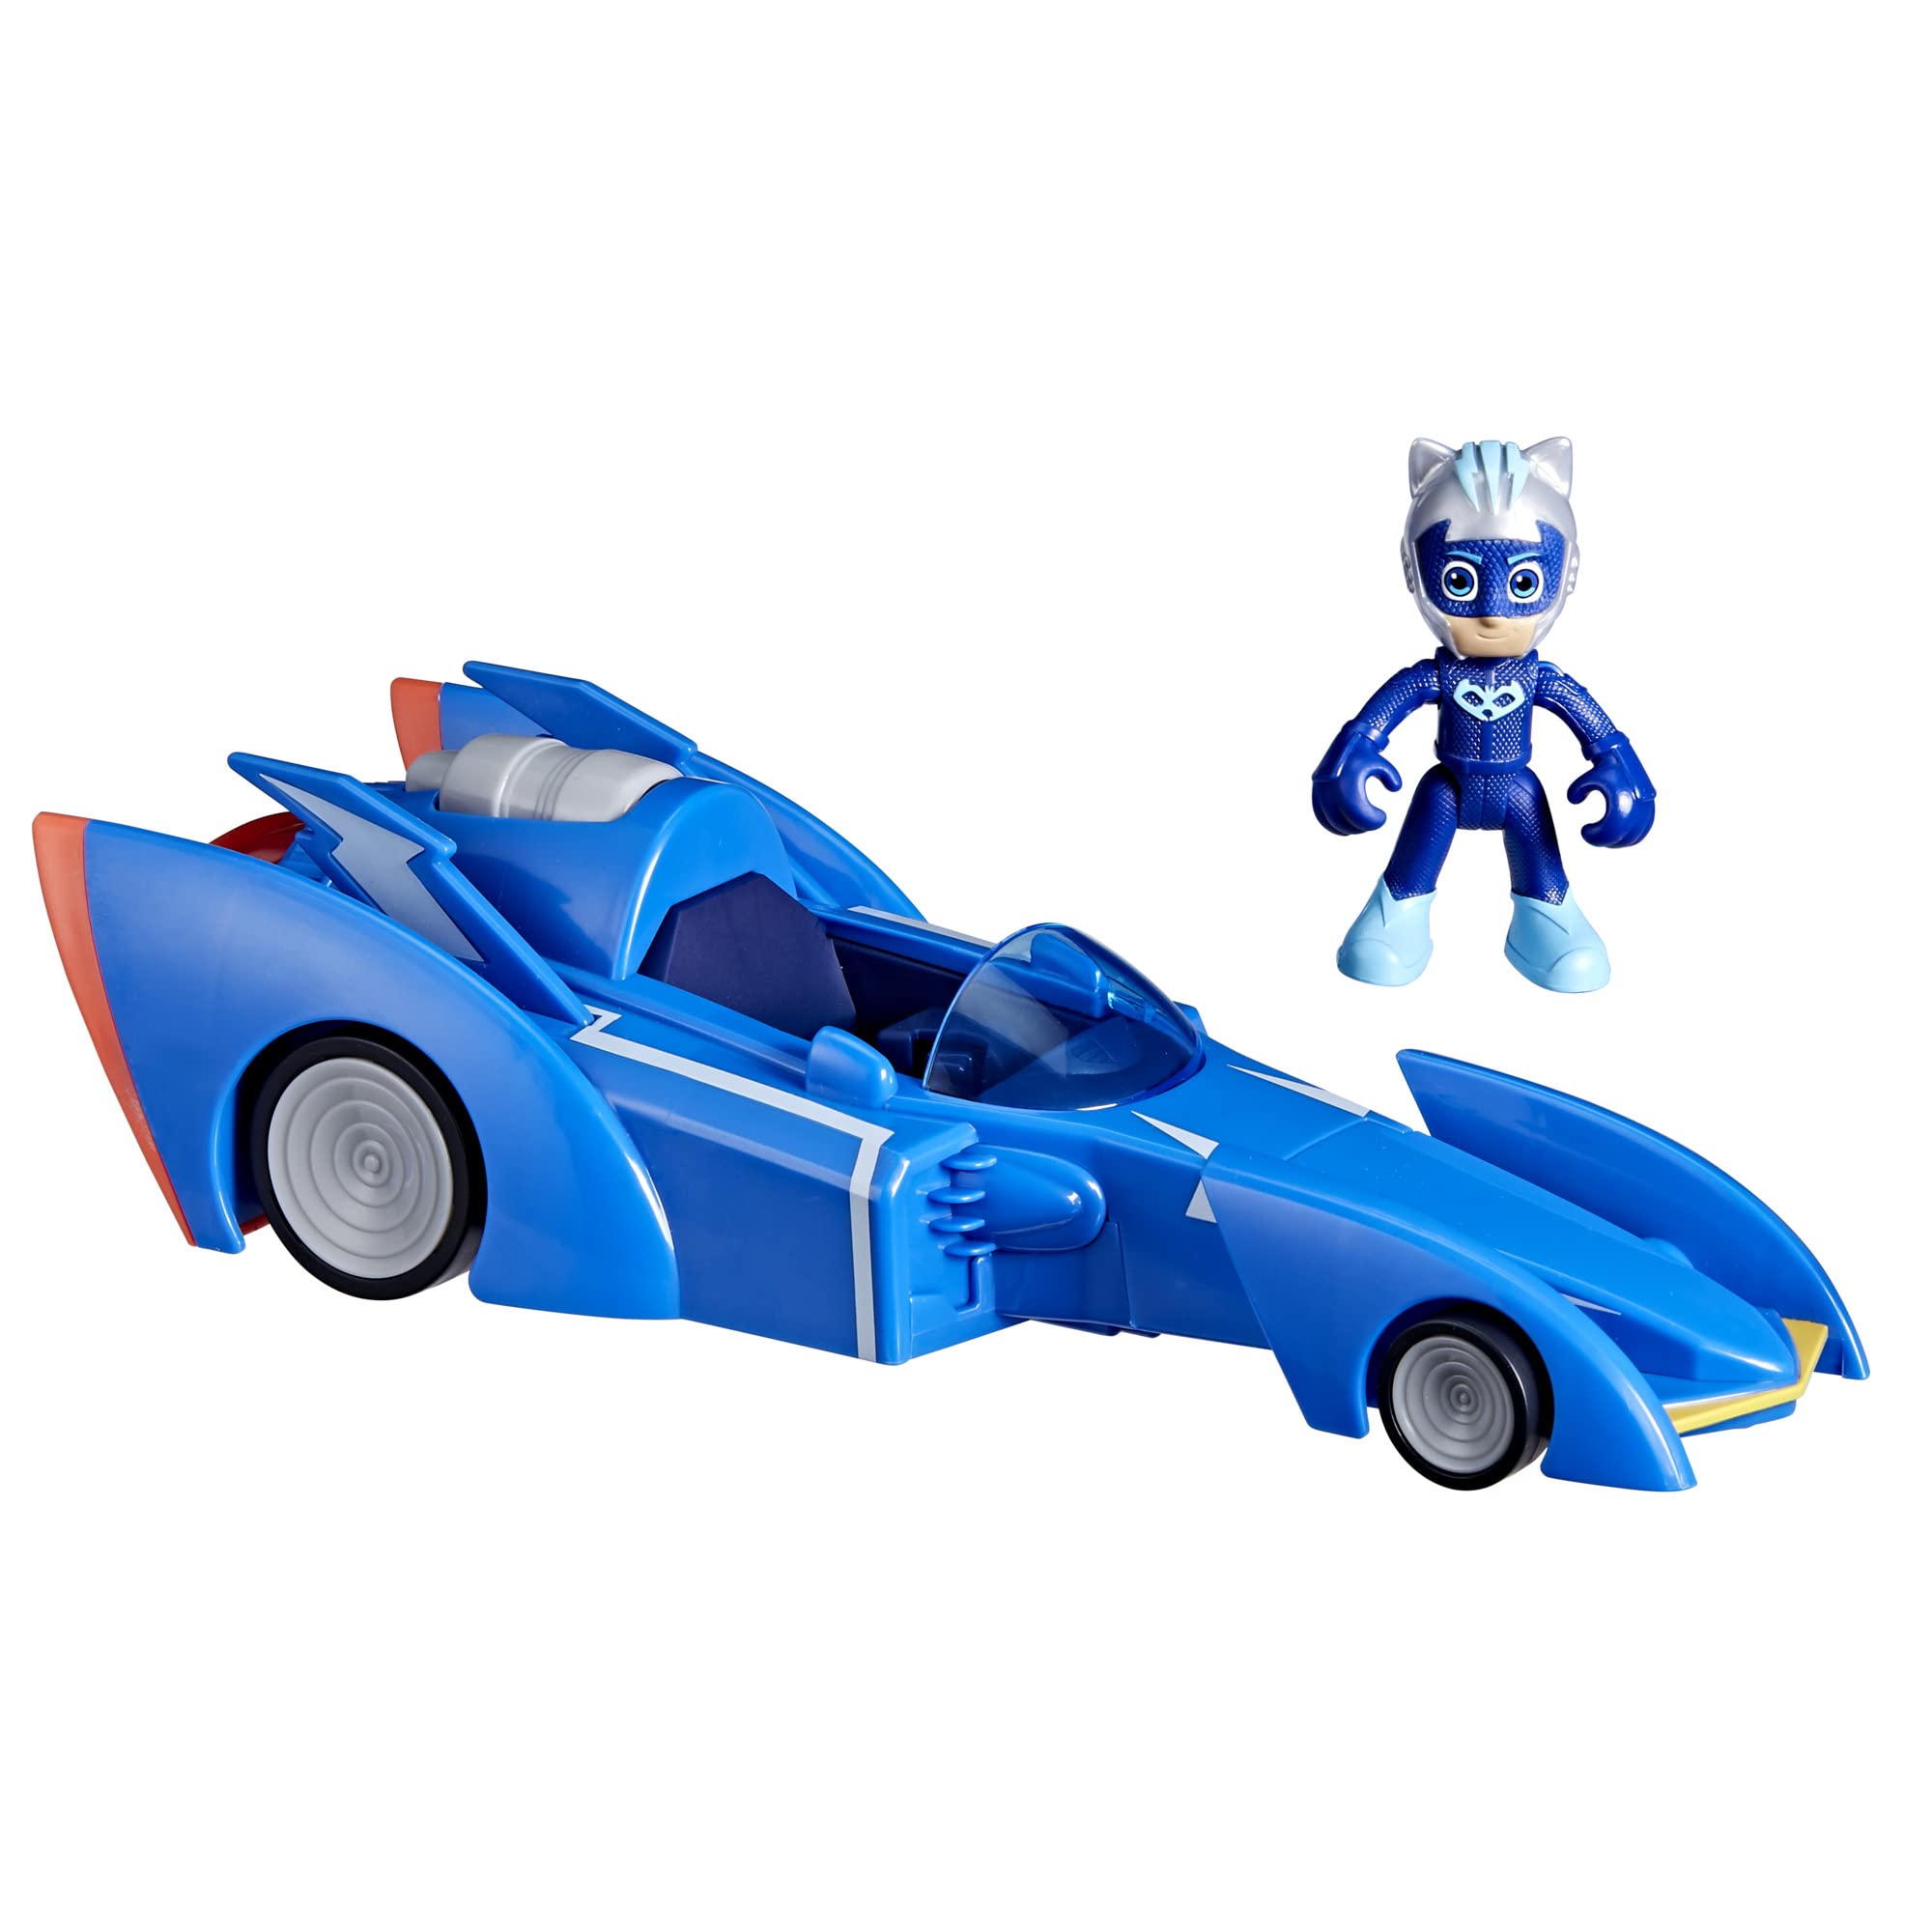 PJ Masks Power Heroes Cat Racer, PJ Masks Toy Car with Lights and Sounds, Preschool Toys for Boys and Girls 3 Years and Up